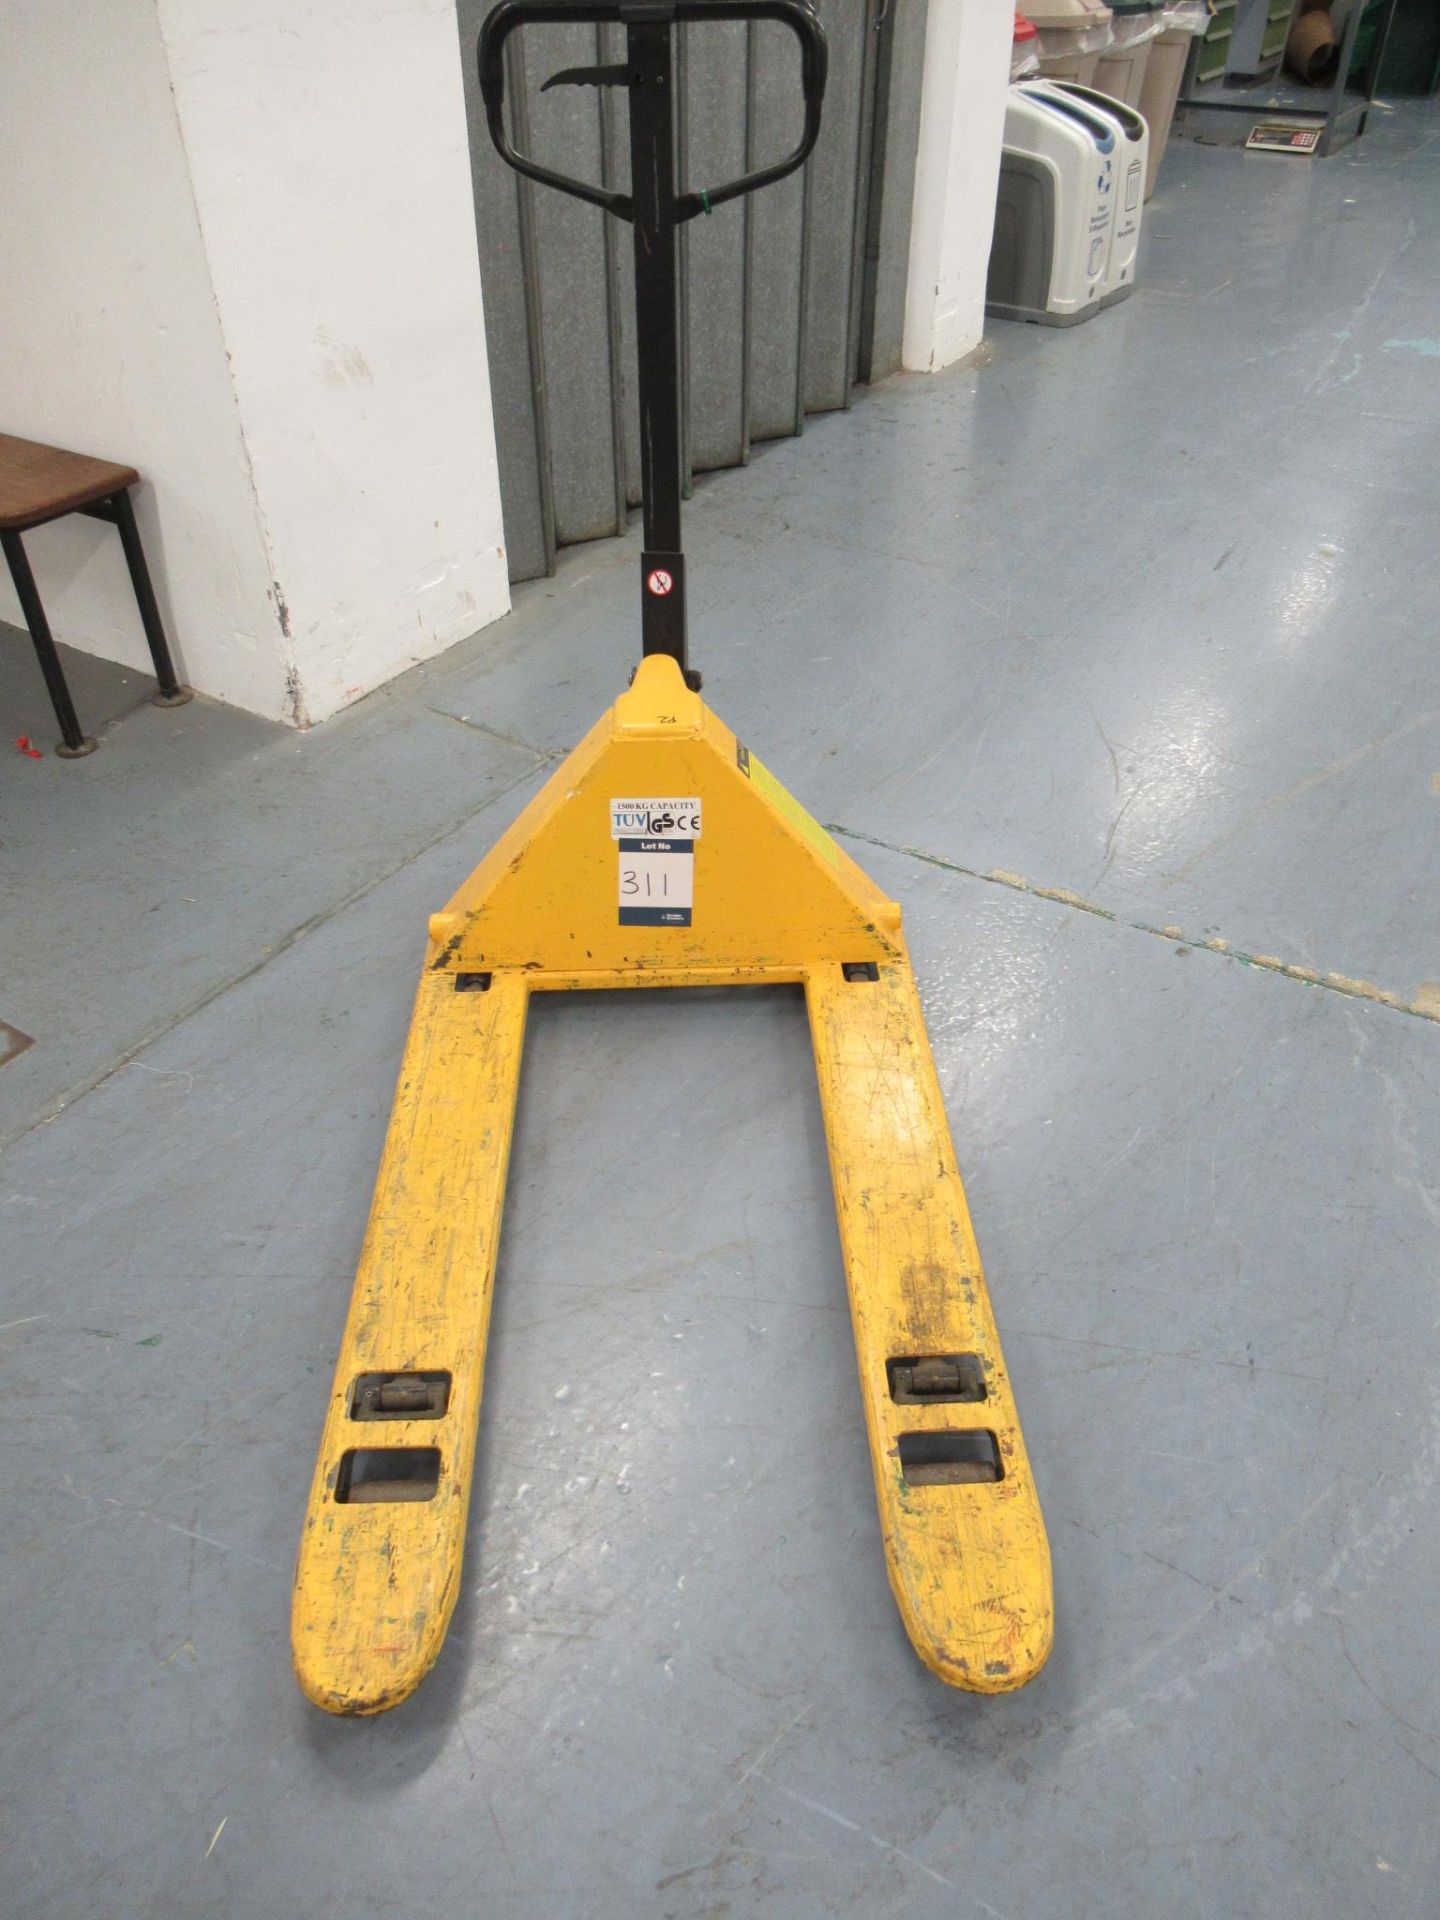 1500kg capacity hydraulic wide fork hand pallet truck, fork length 1000mm x width 675mm - Image 3 of 3